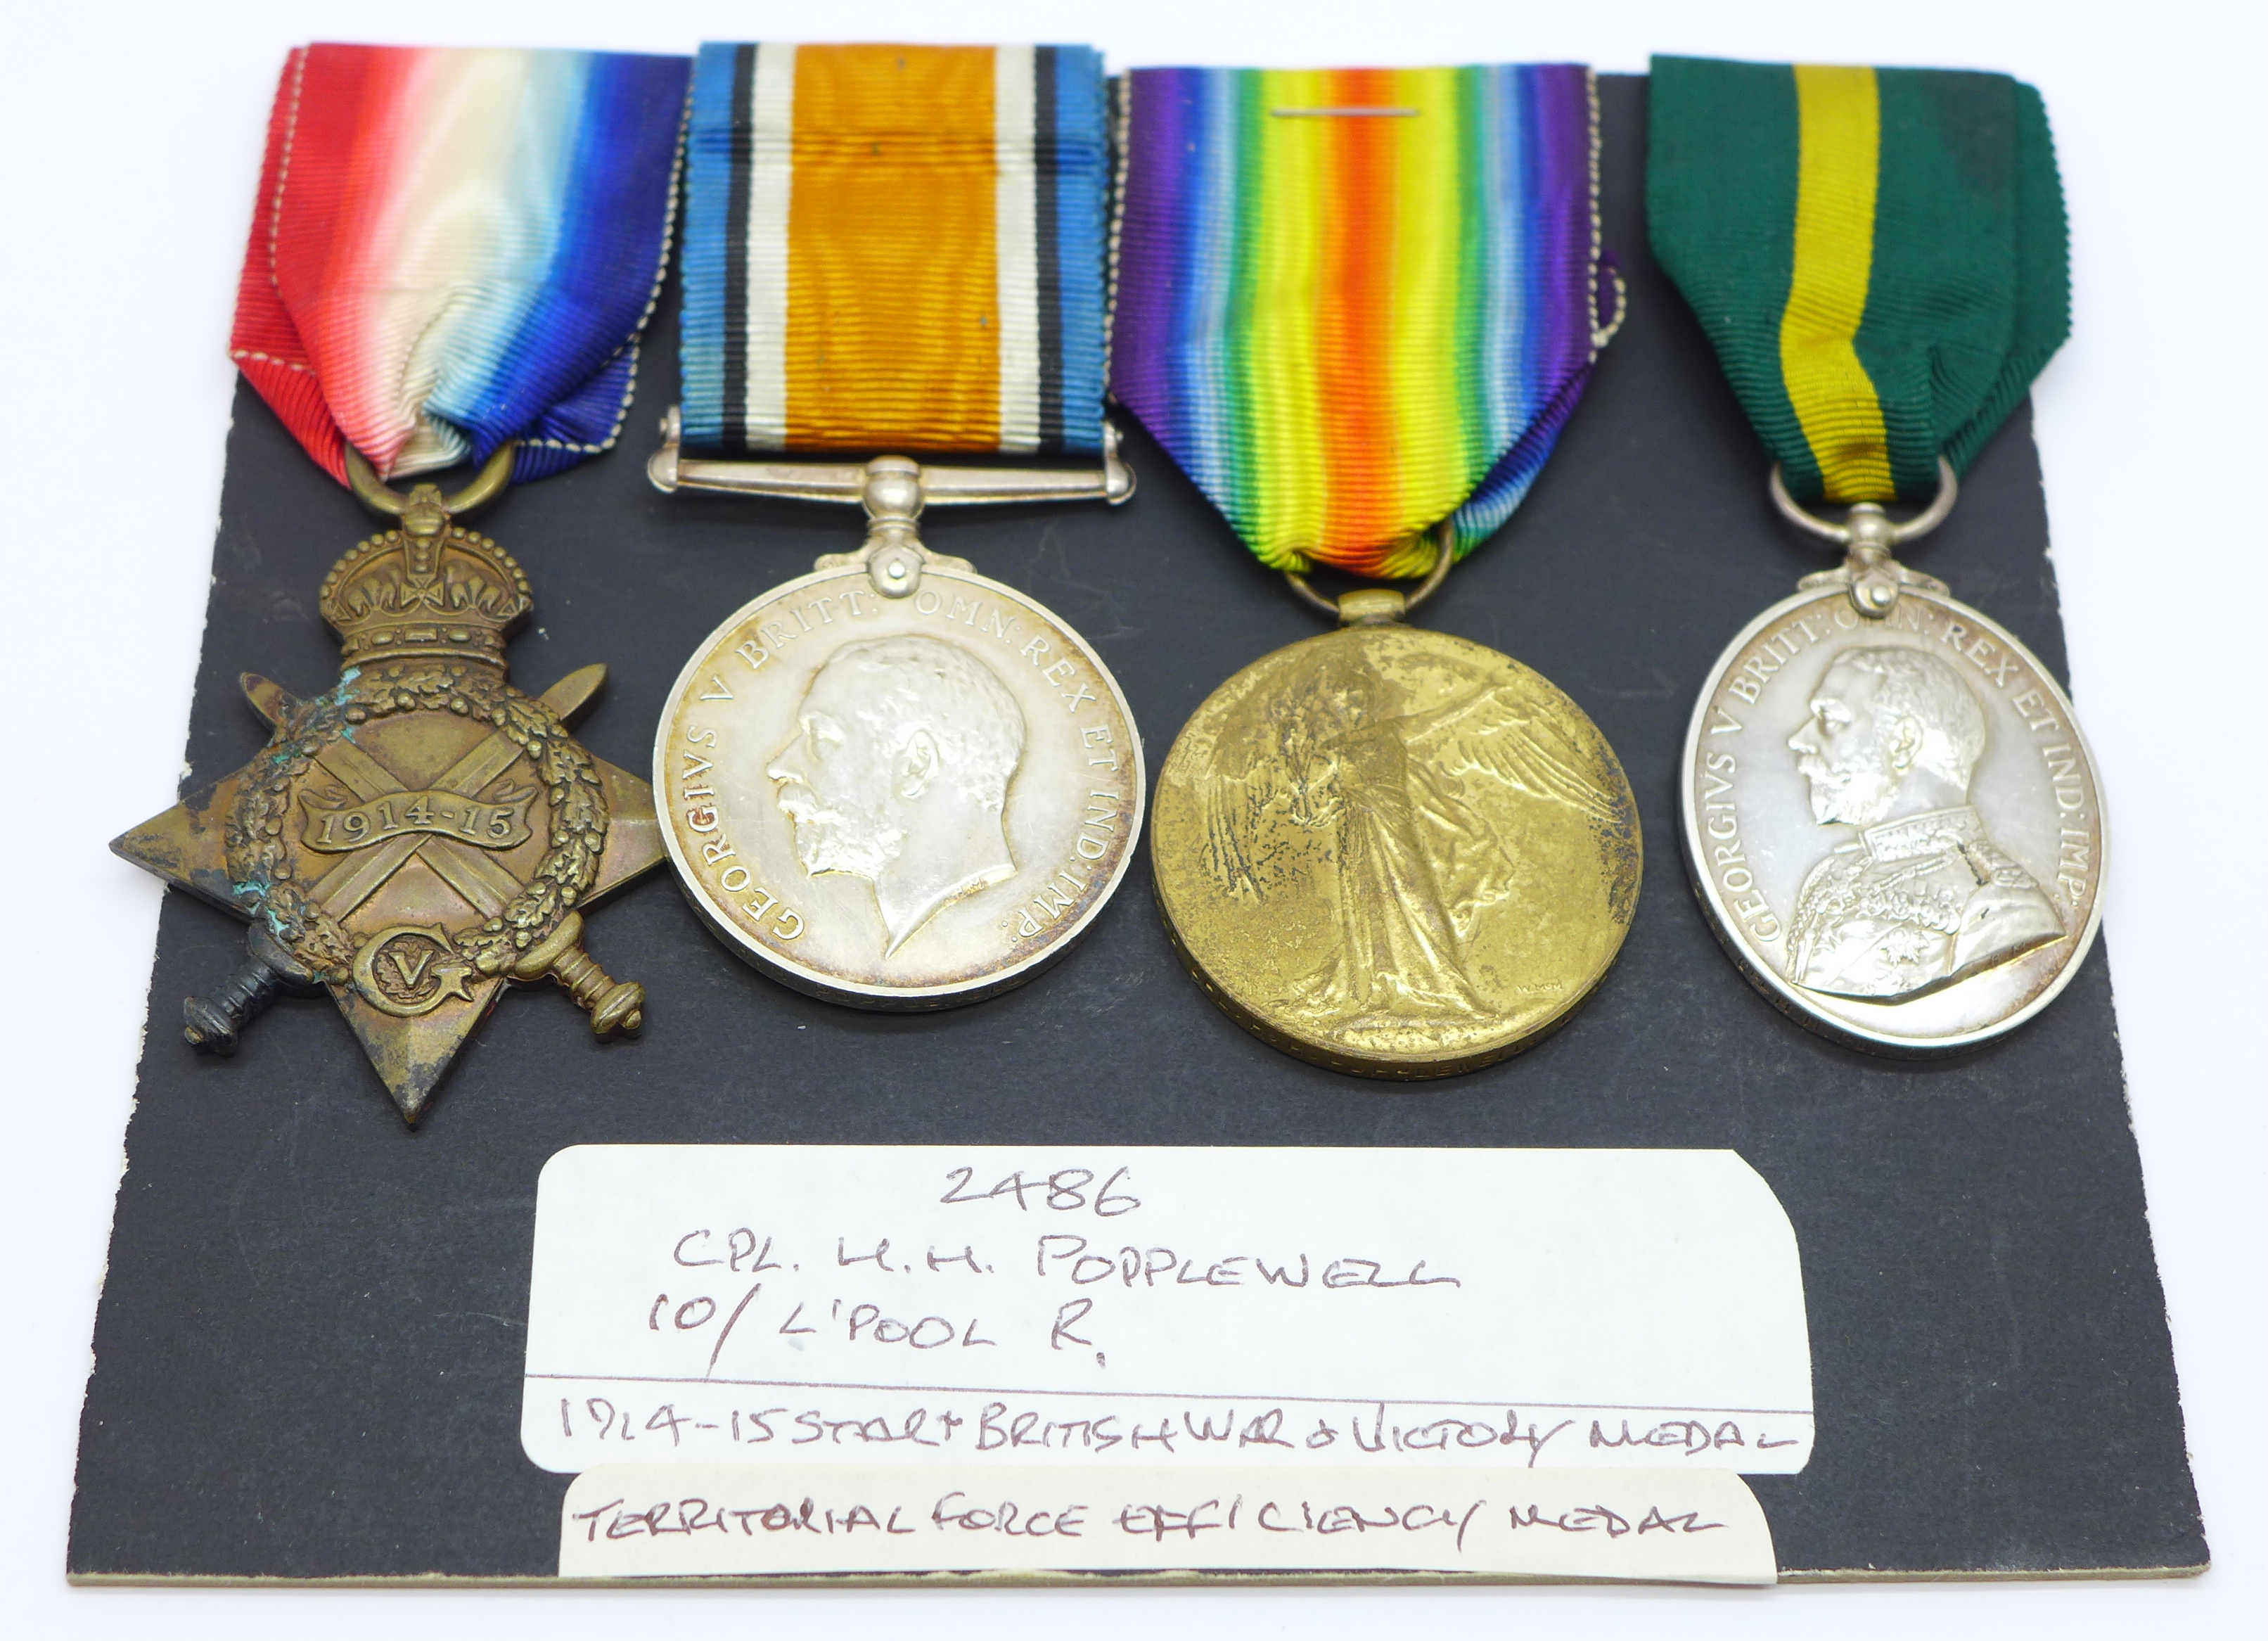 Four medals; WWI trio and Territorial Efficiency medal to 2486 Cpl. H.H. Popplewell 10/L'Pool R.